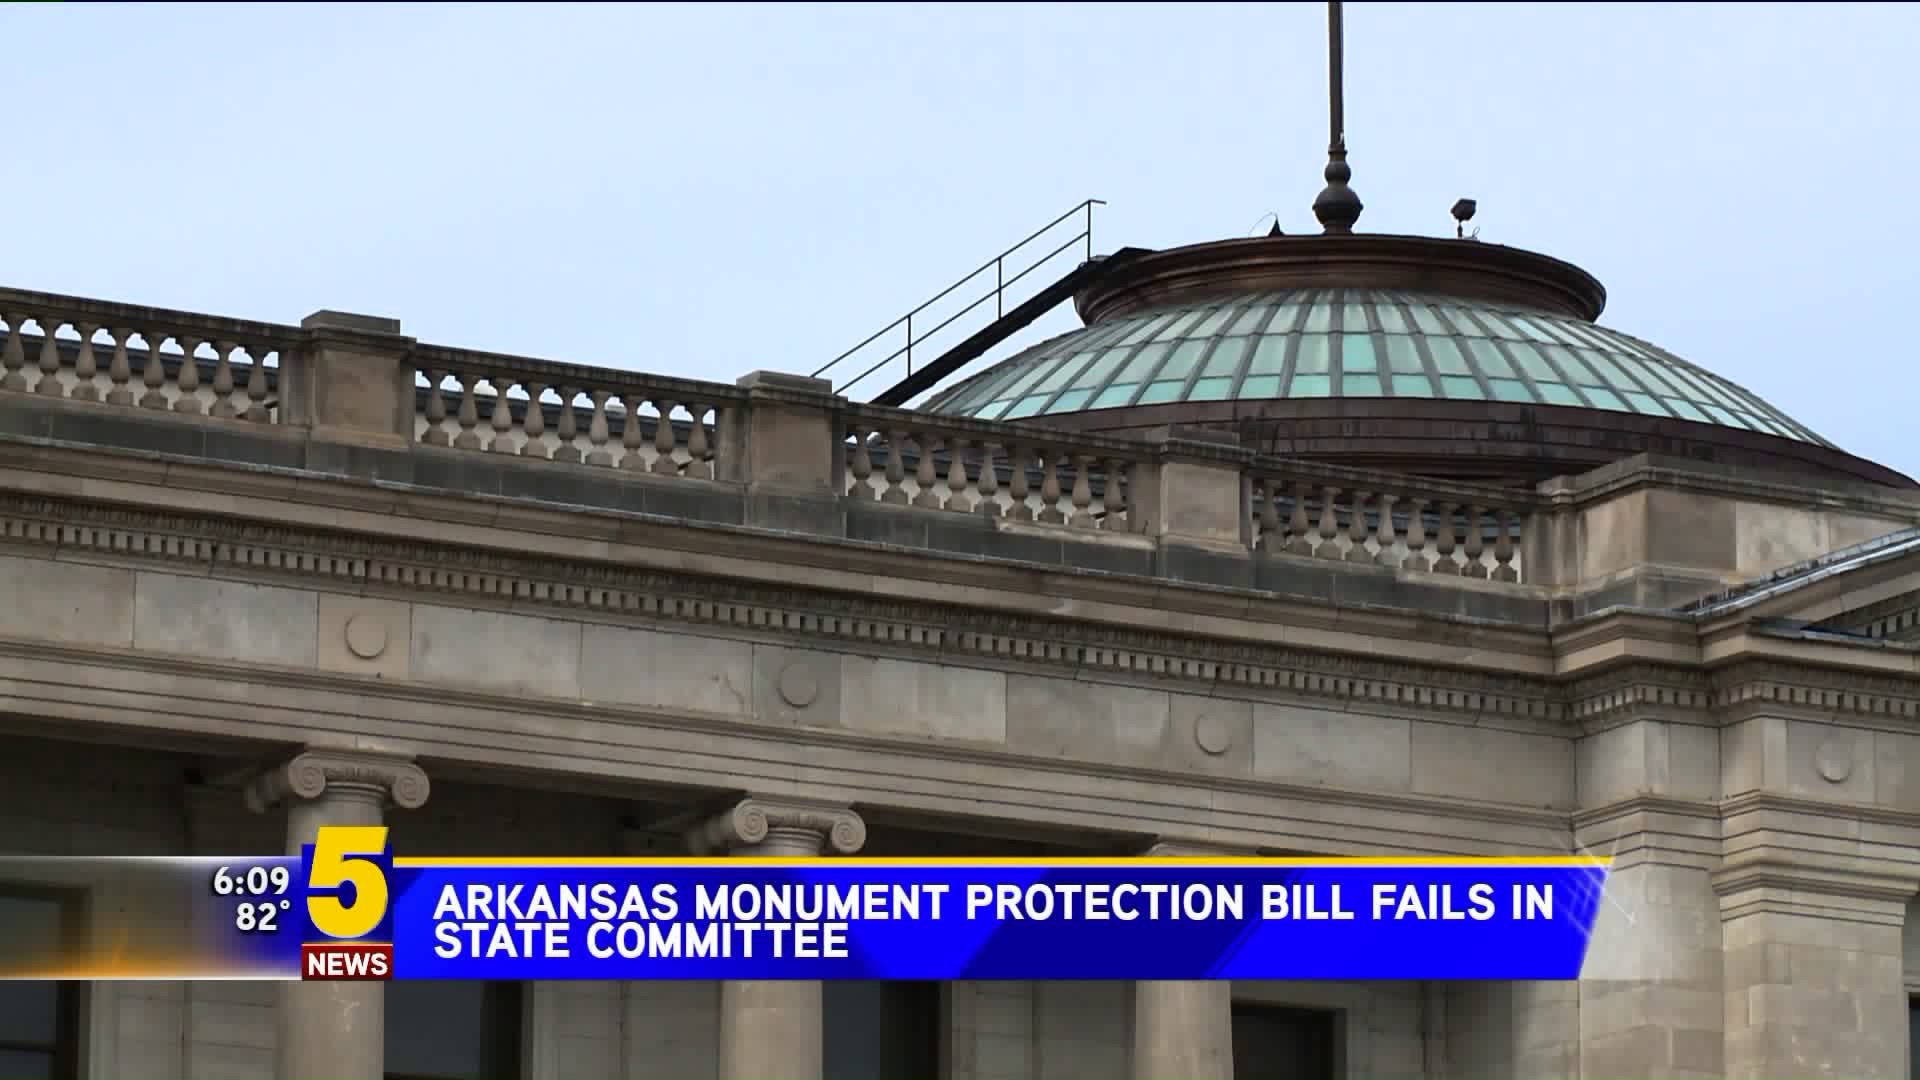 Arkansas Monument Protection Bill Fails in State Committee